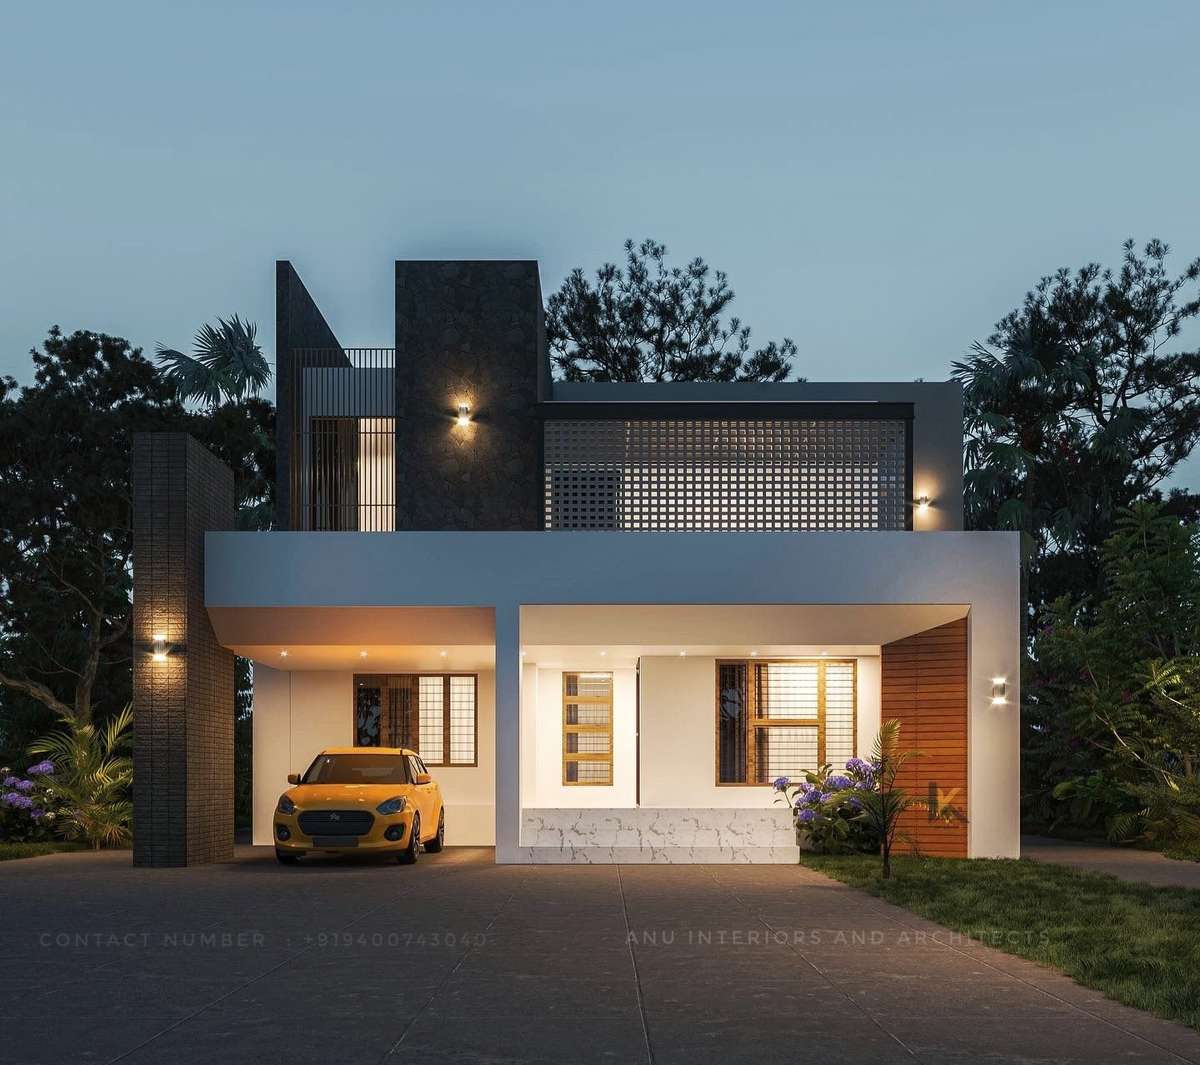 exterior 
house designing and construction 
interior 
exterior 
landscape 
contact number : +9194 0074 3040